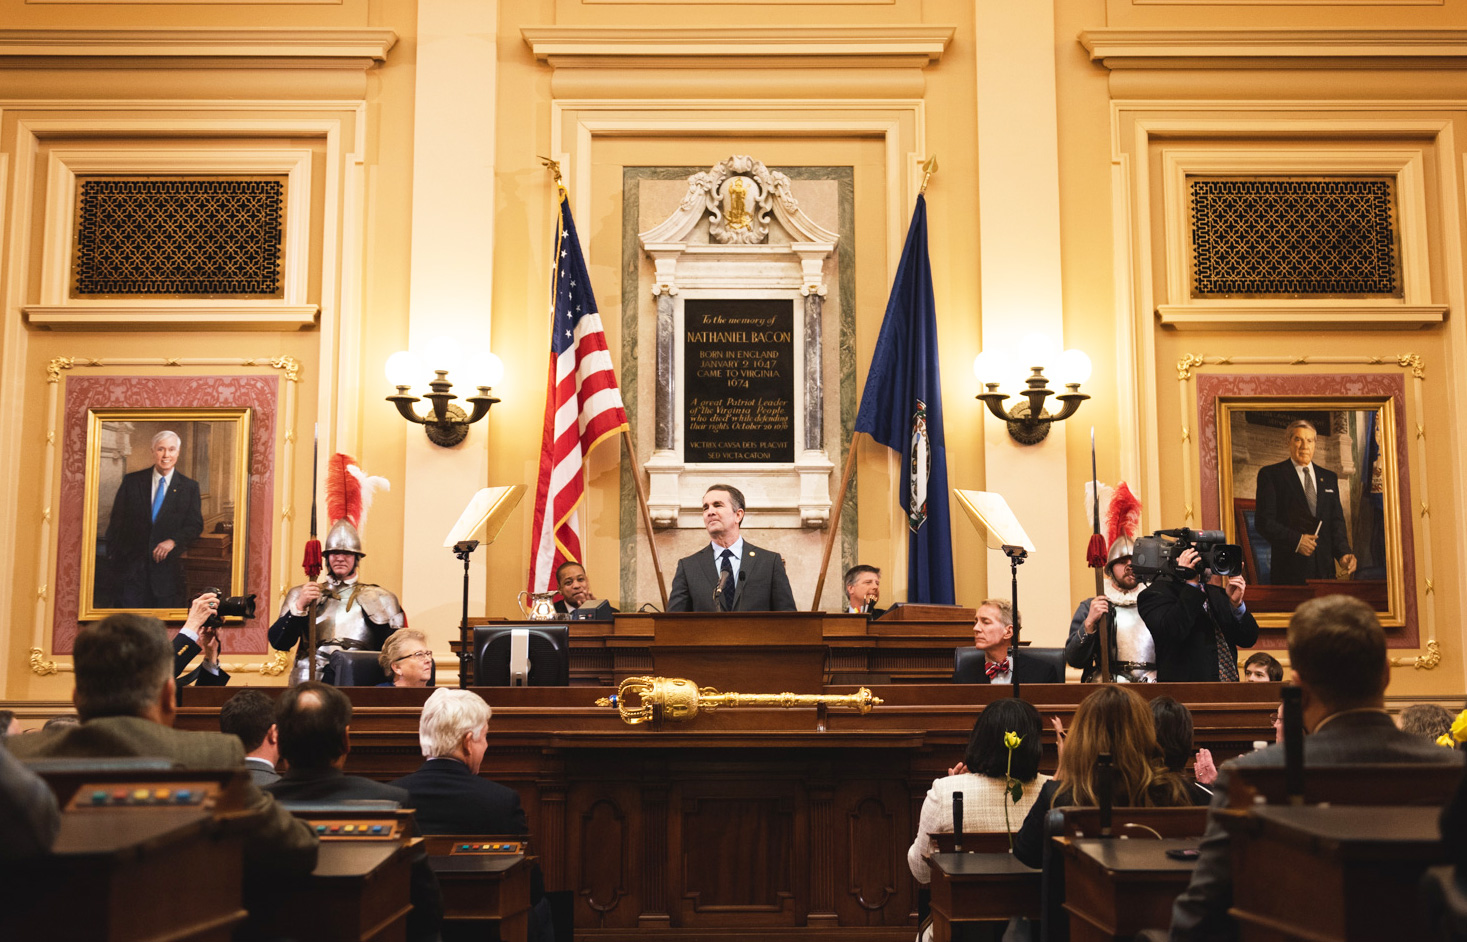 Tim Giago: The governor of Virginia is in a heap of trouble over racist photo